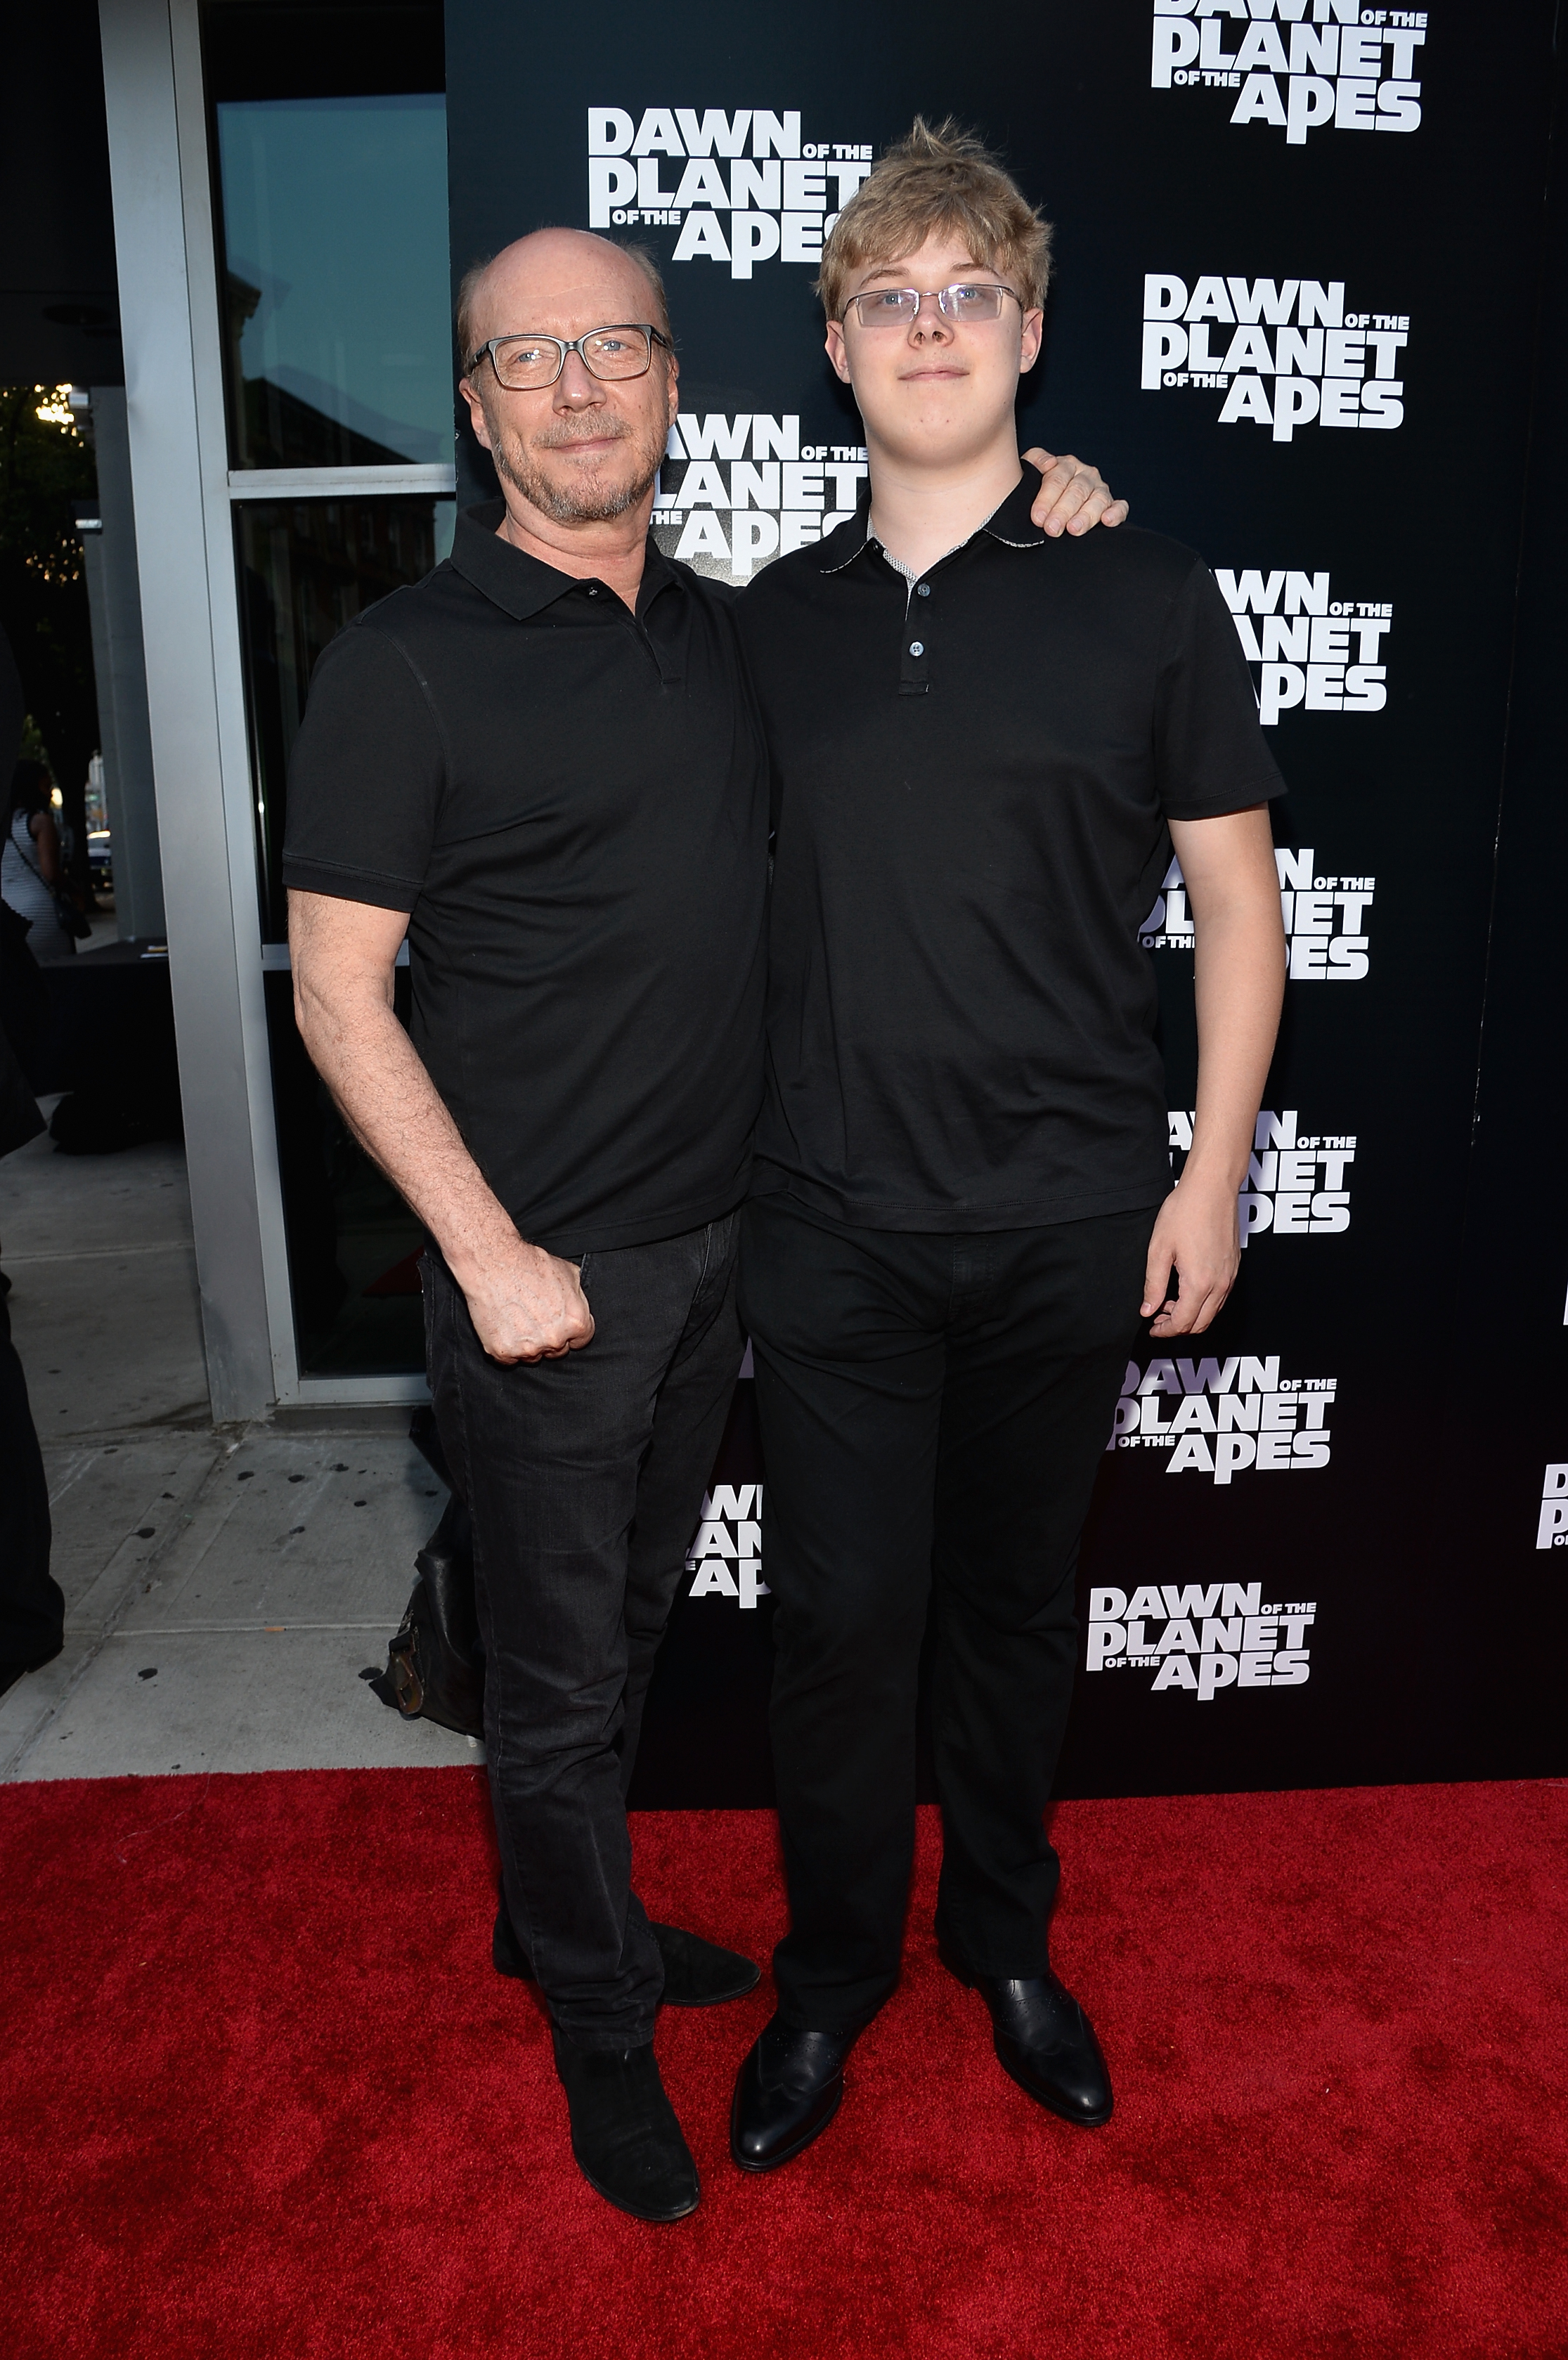 Paul and James Haggis at the "Dawn of the Planet of the Apes" premiere on July 8, 2014 in New York City | Source: Getty Images